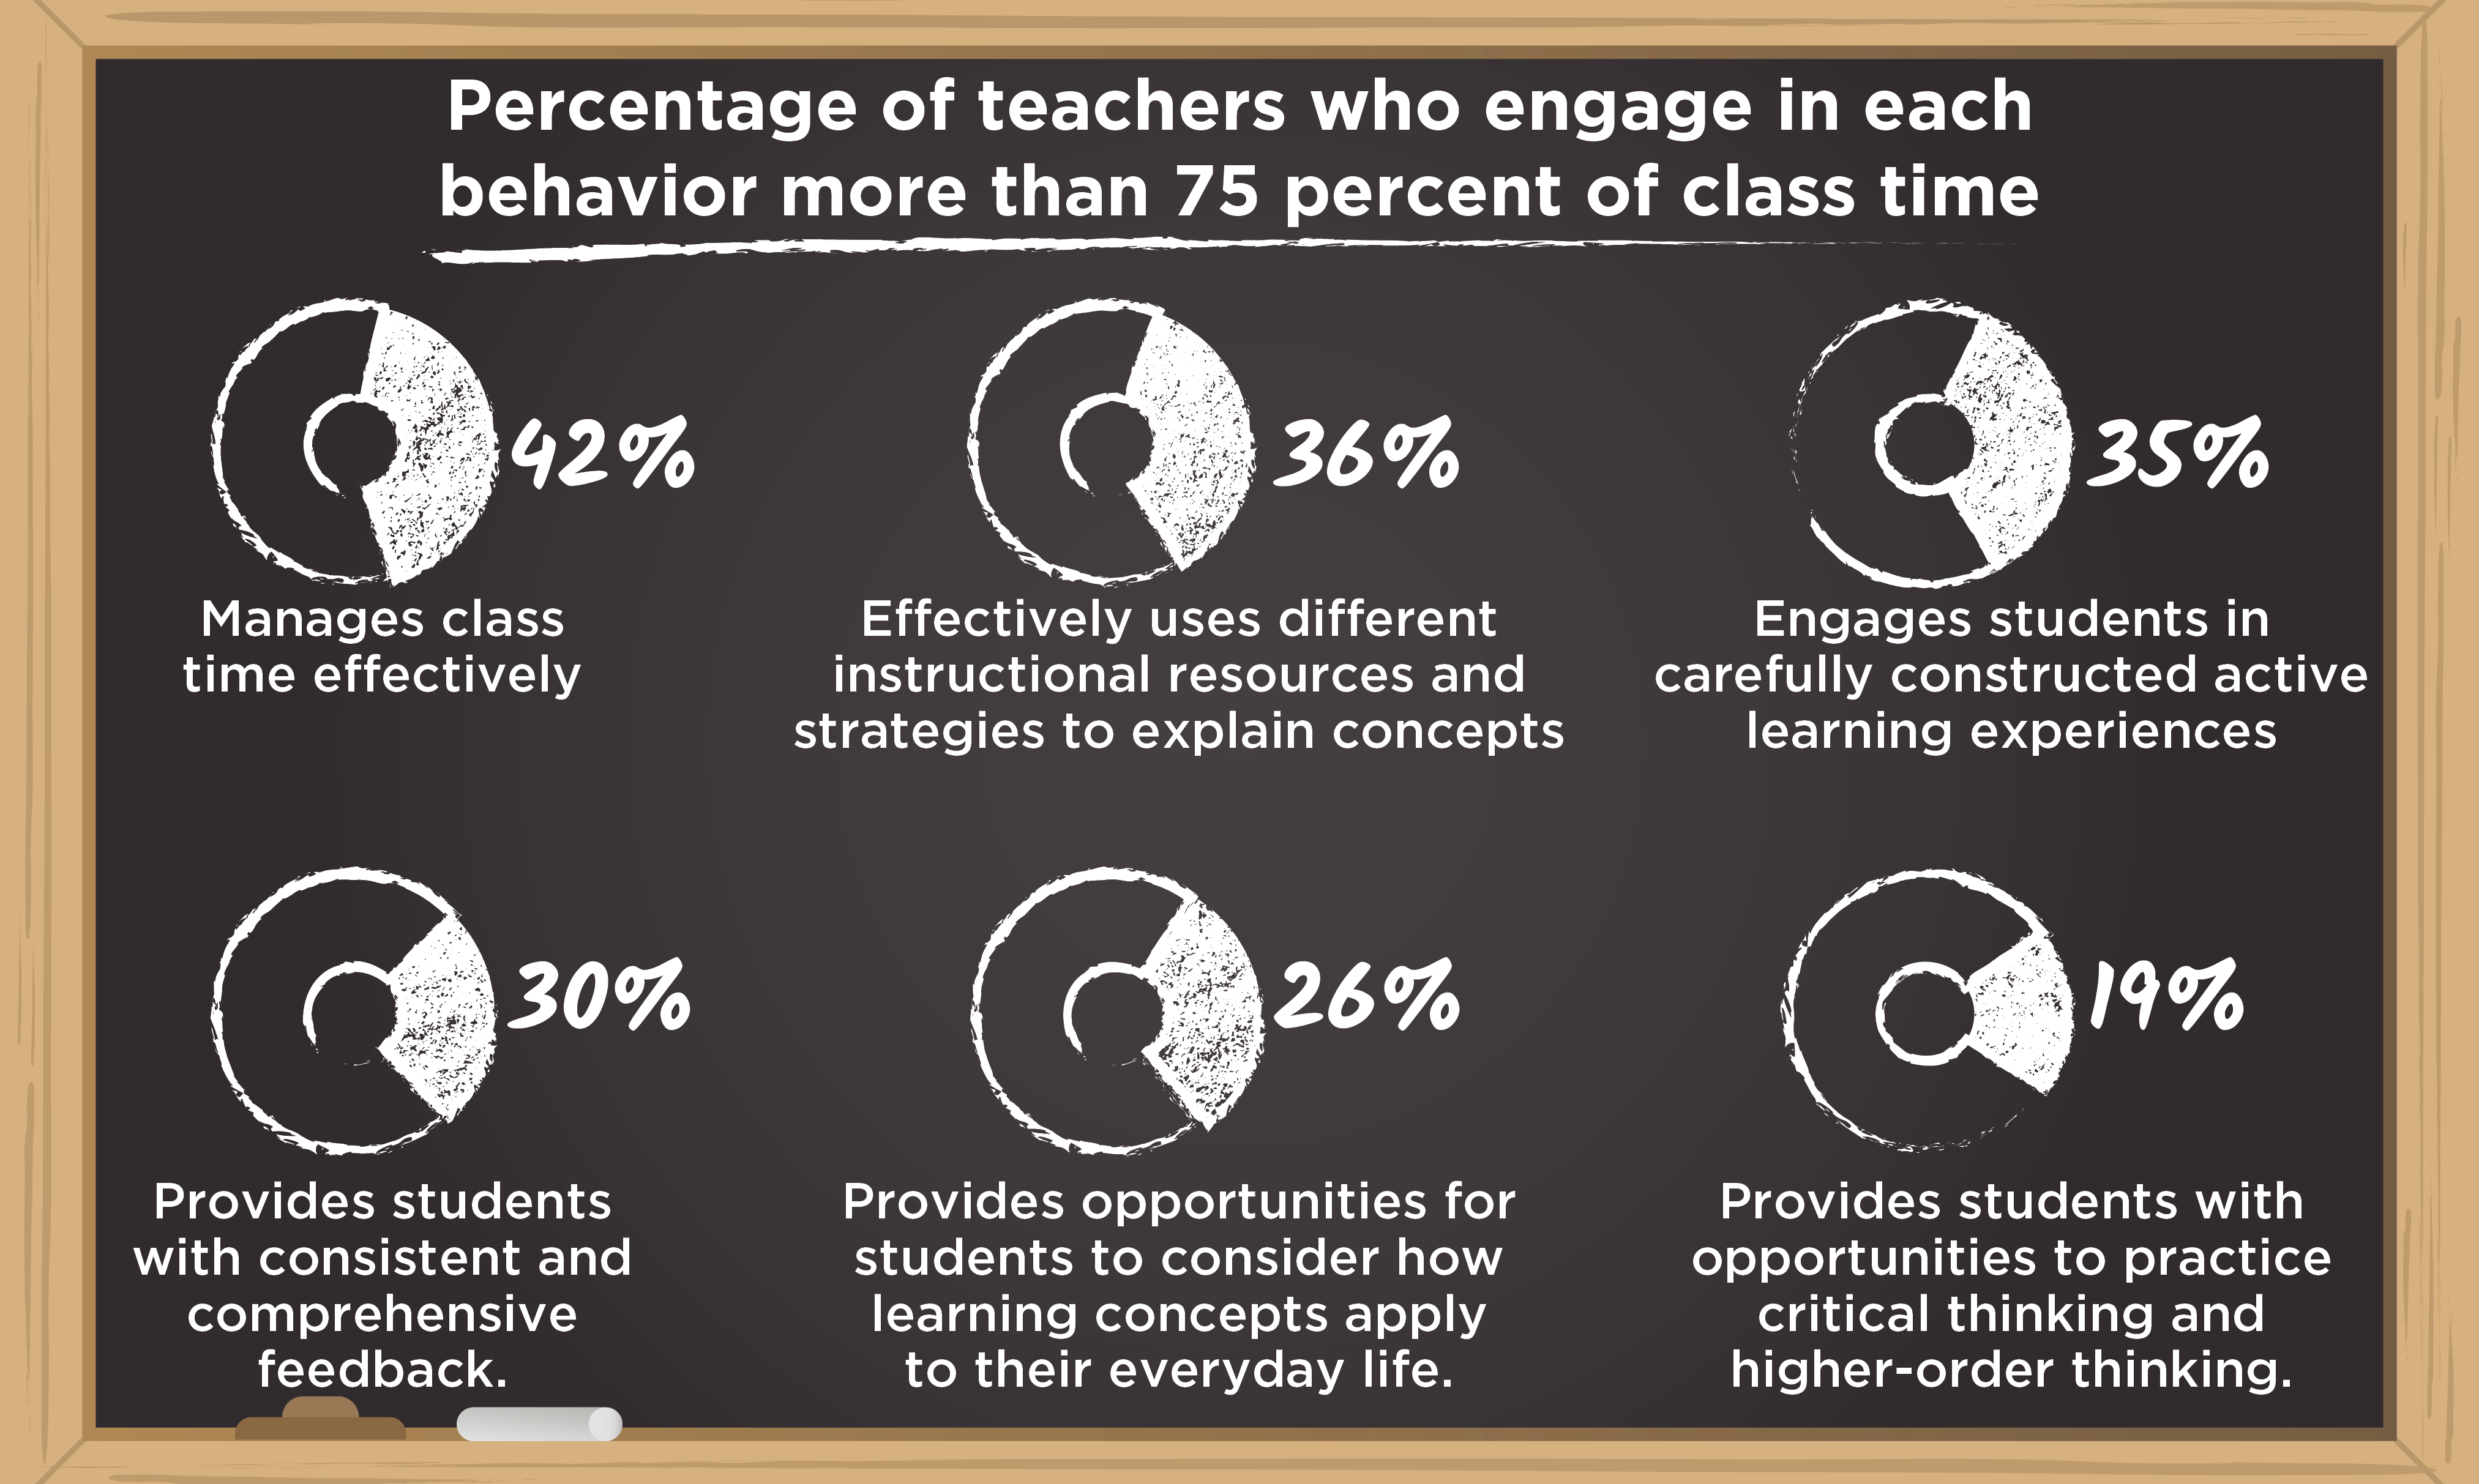 Percentage of teachers who engage in each behavior more than 75 percent of class time. Manages classtime effectively: 42%. Effectively use different instructional resources and strategies to explain concepts: 36%. Engages students in carefully constructed active learning experiences: 35%. Provides students with consistent and comprehensive feedback: 30%. Provides opportunities for students to consider how learning concepts apply to their everyday life: 26%. Provides students with opportunities to practice critical thinking and higher-order thinking: 19%.